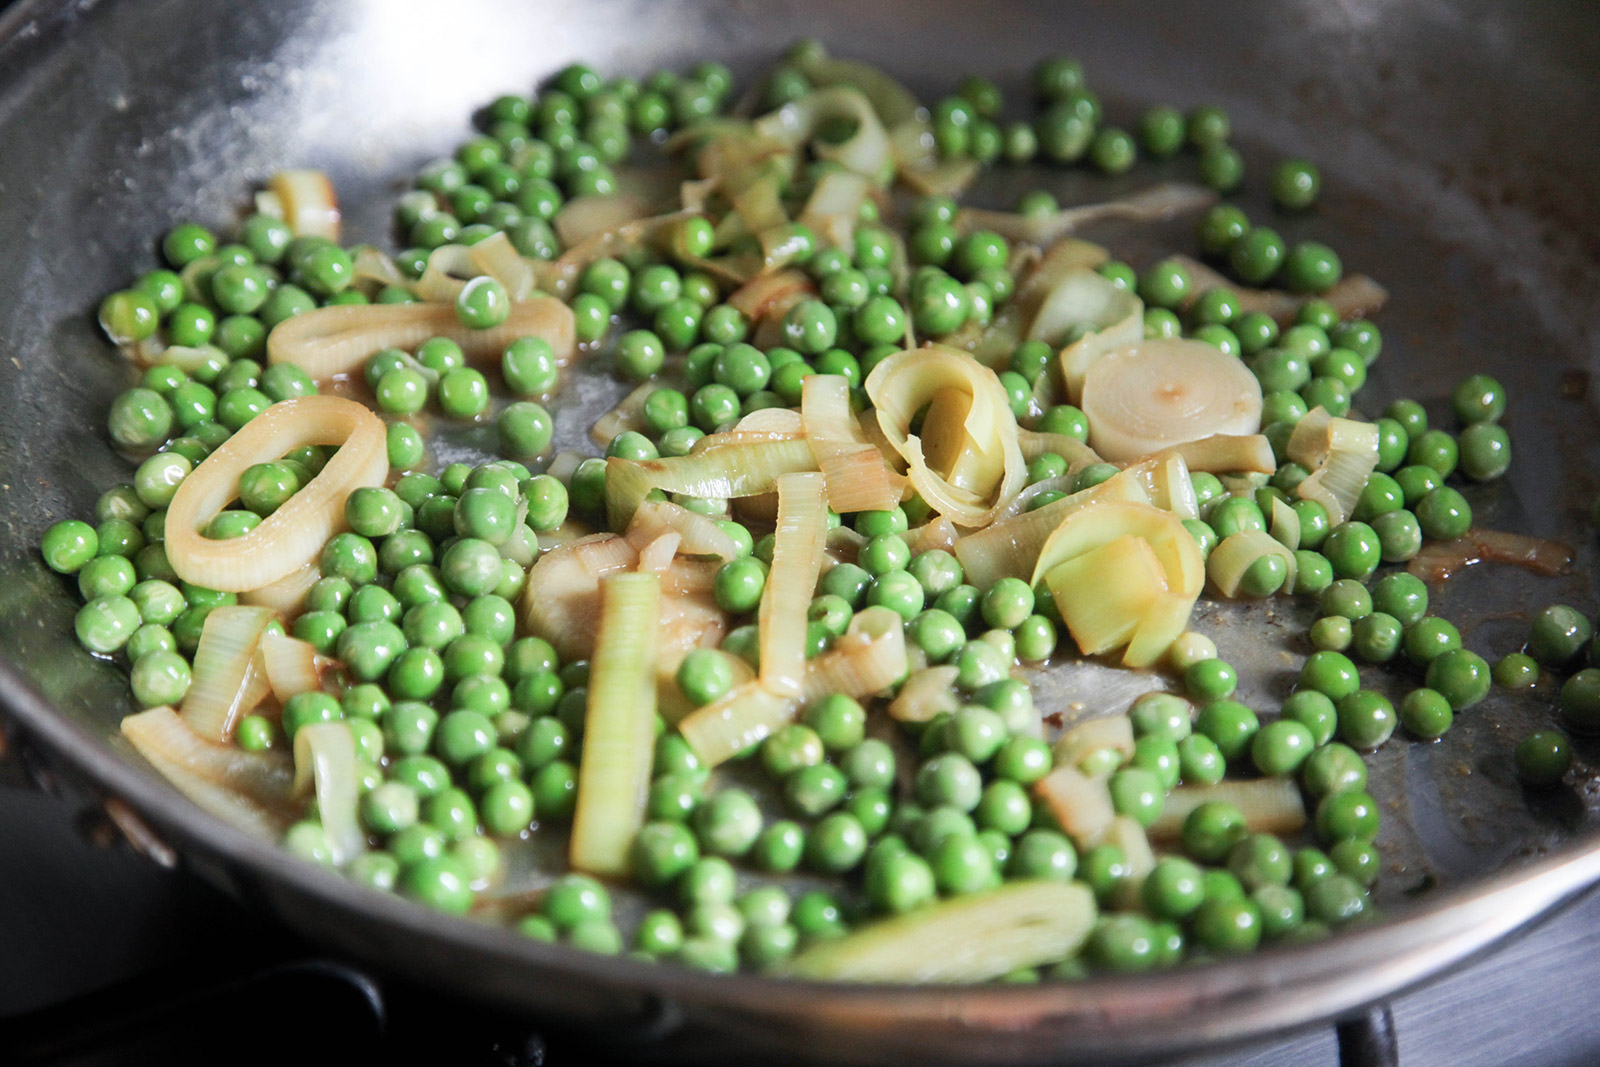 Leeks and Peas cooked in stock ready for the salad